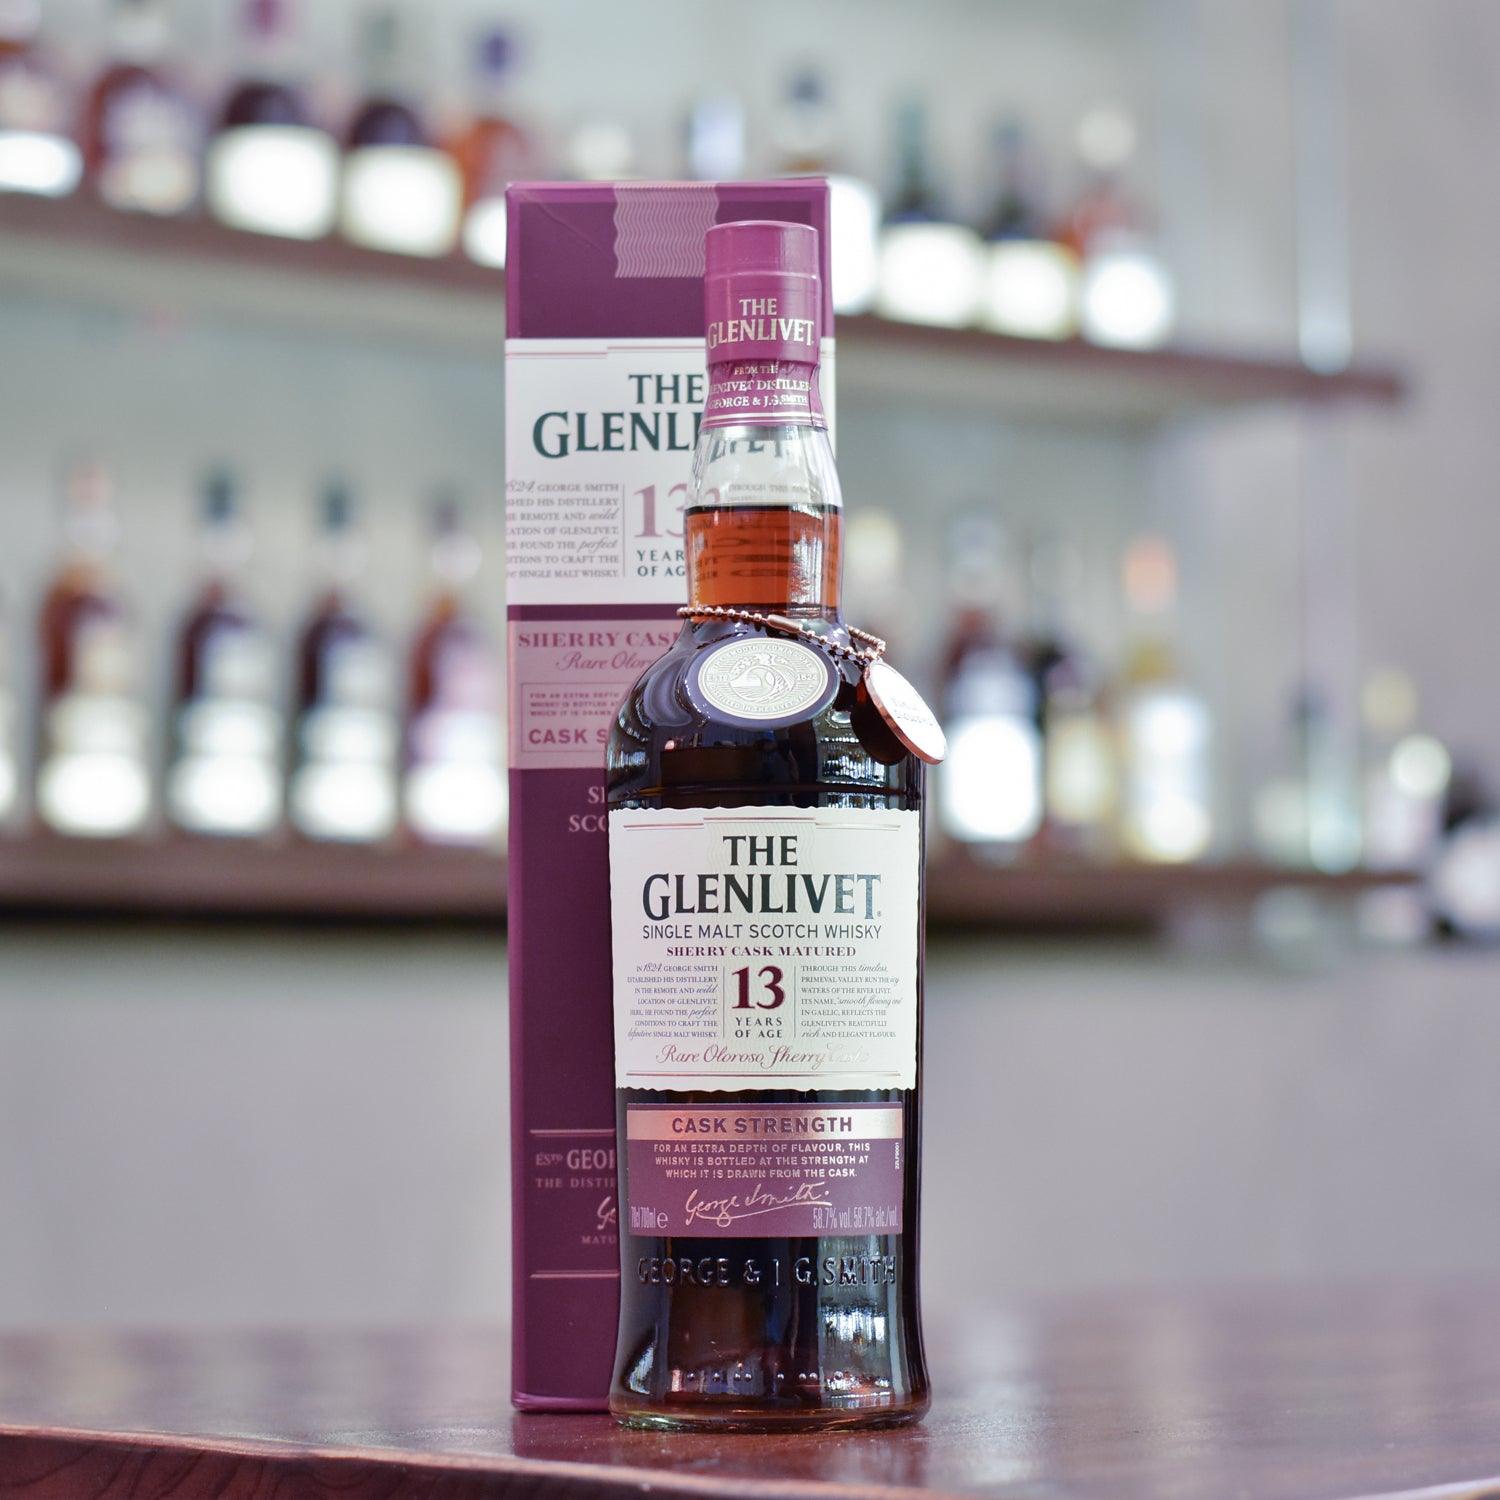 Glenlivet 13 Year Old Cask Strength Sherry Cask Taiwan Exclusive - The Rare Malt